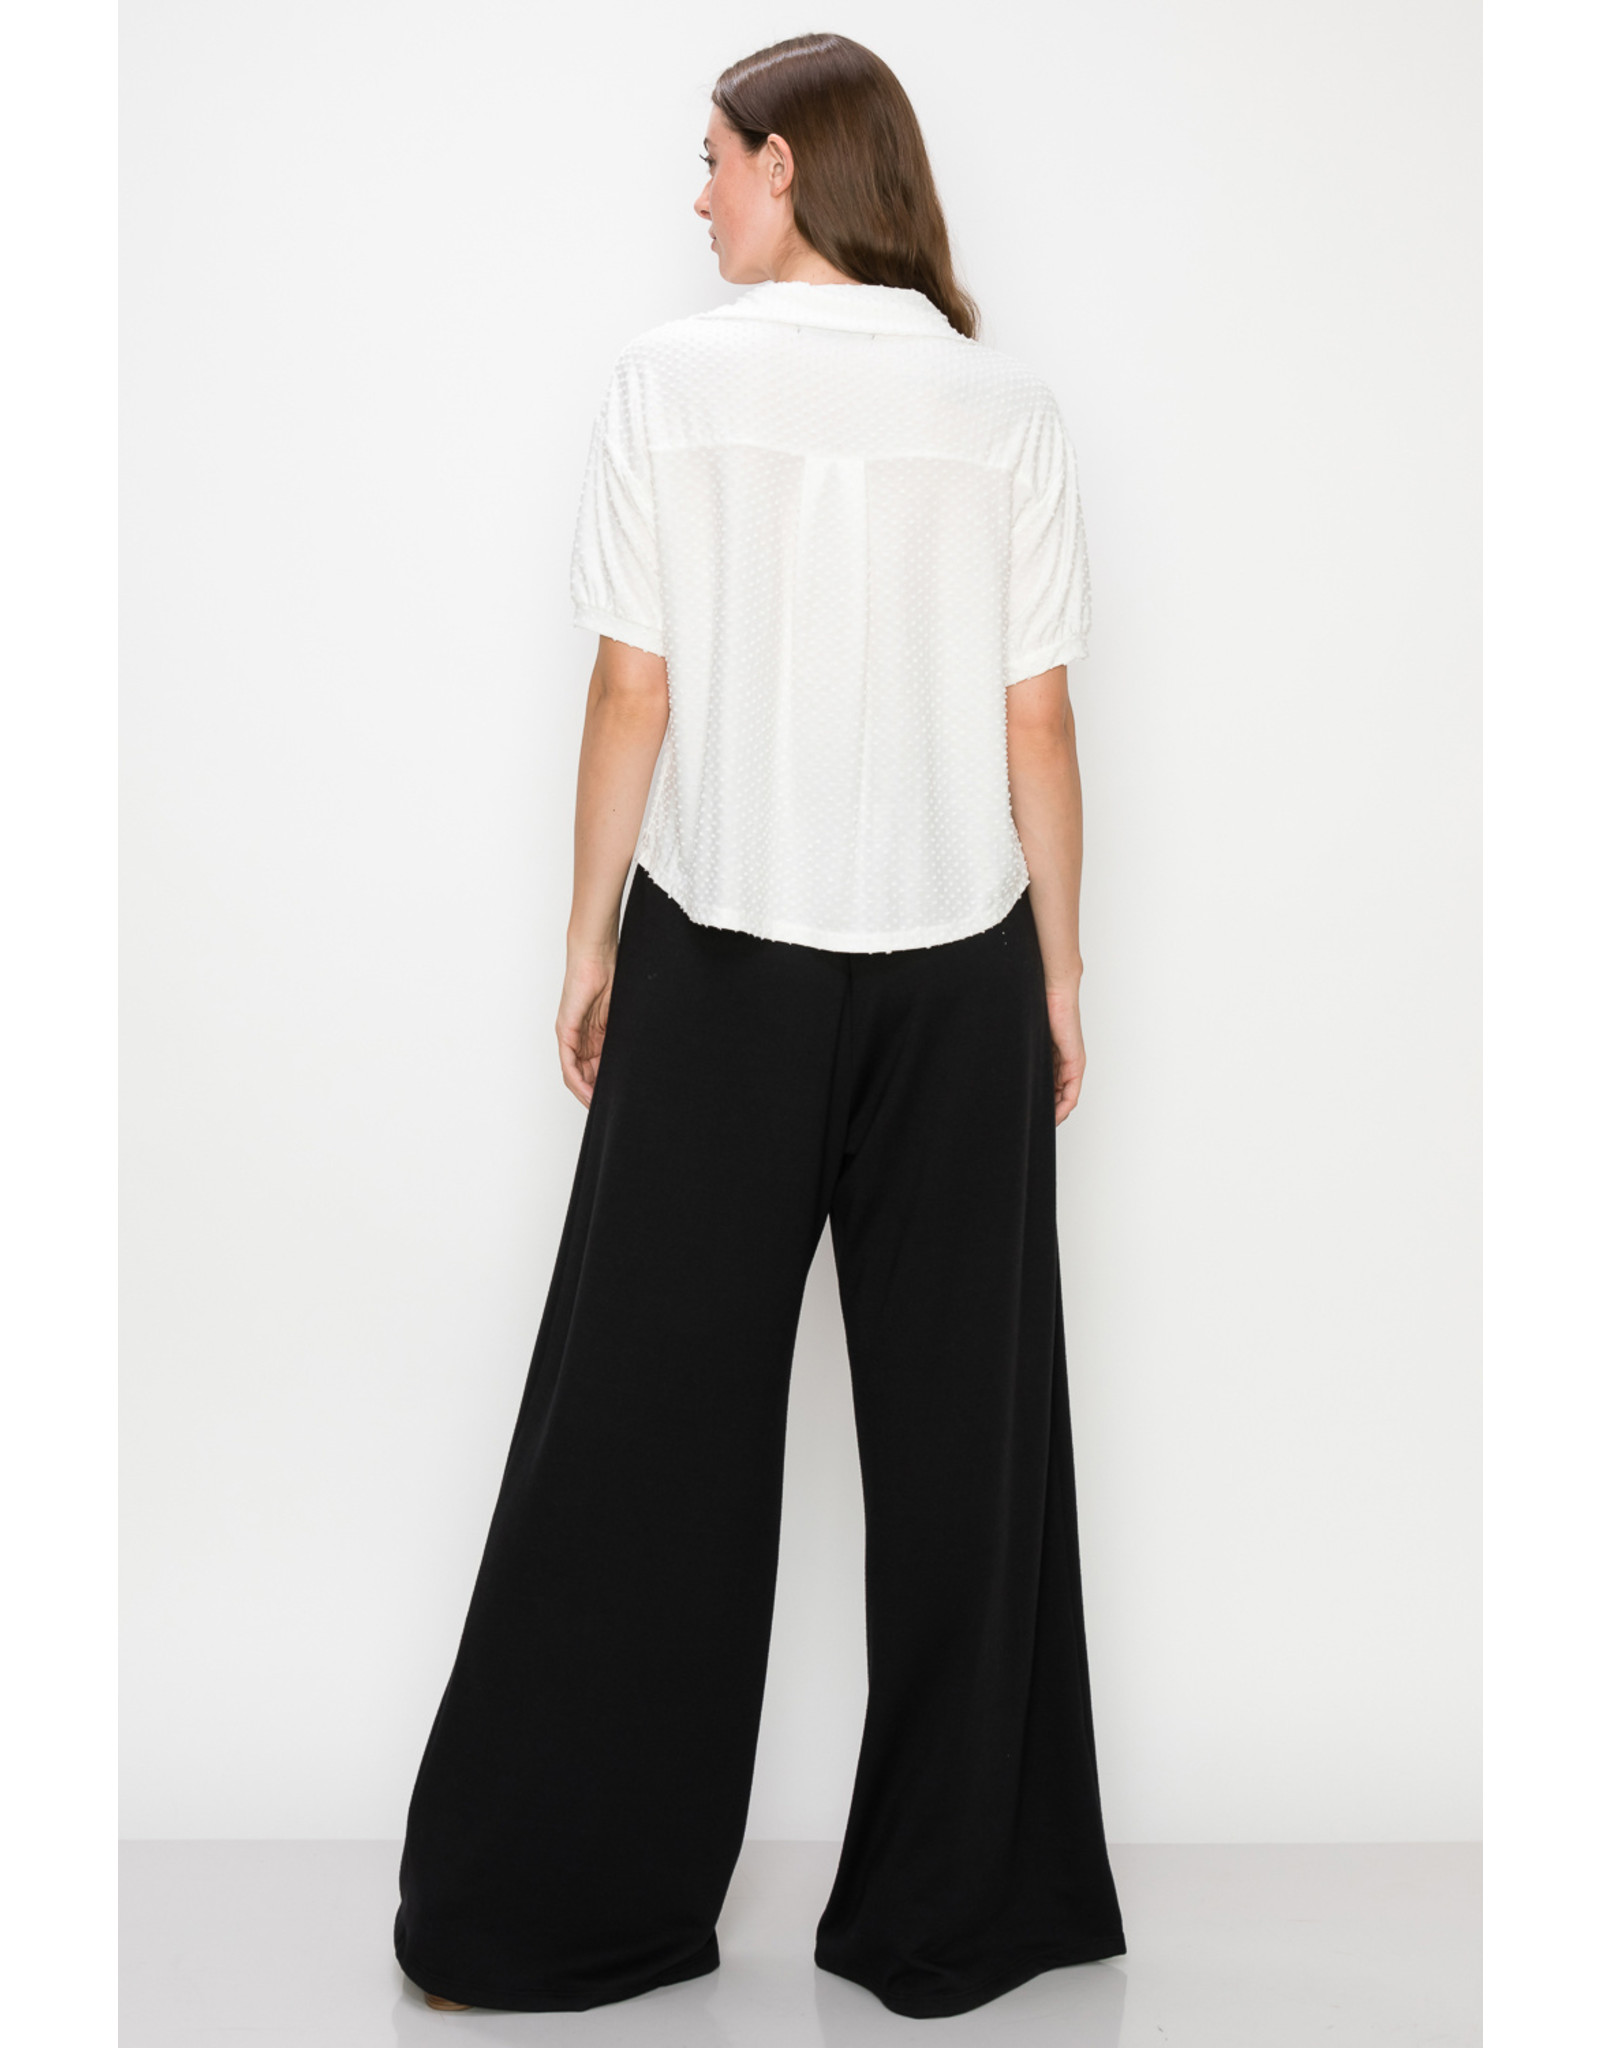 Coin1804 Short Sleeve Cropped Shirt